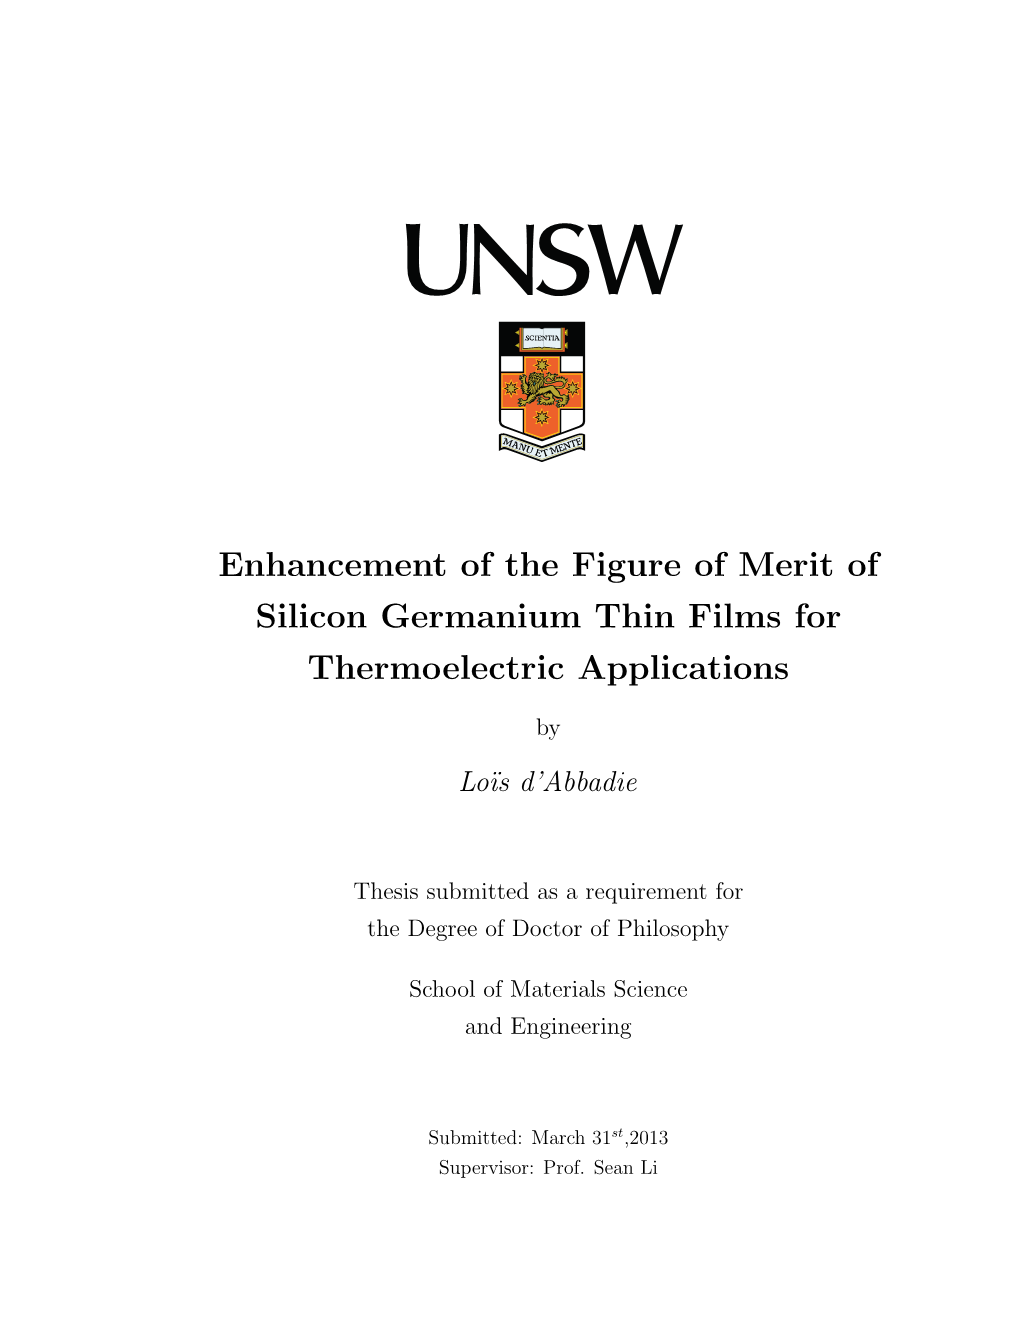 Enhancement of the Figure of Merit of Silicon Germanium Thin Films for Thermoelectric Applications